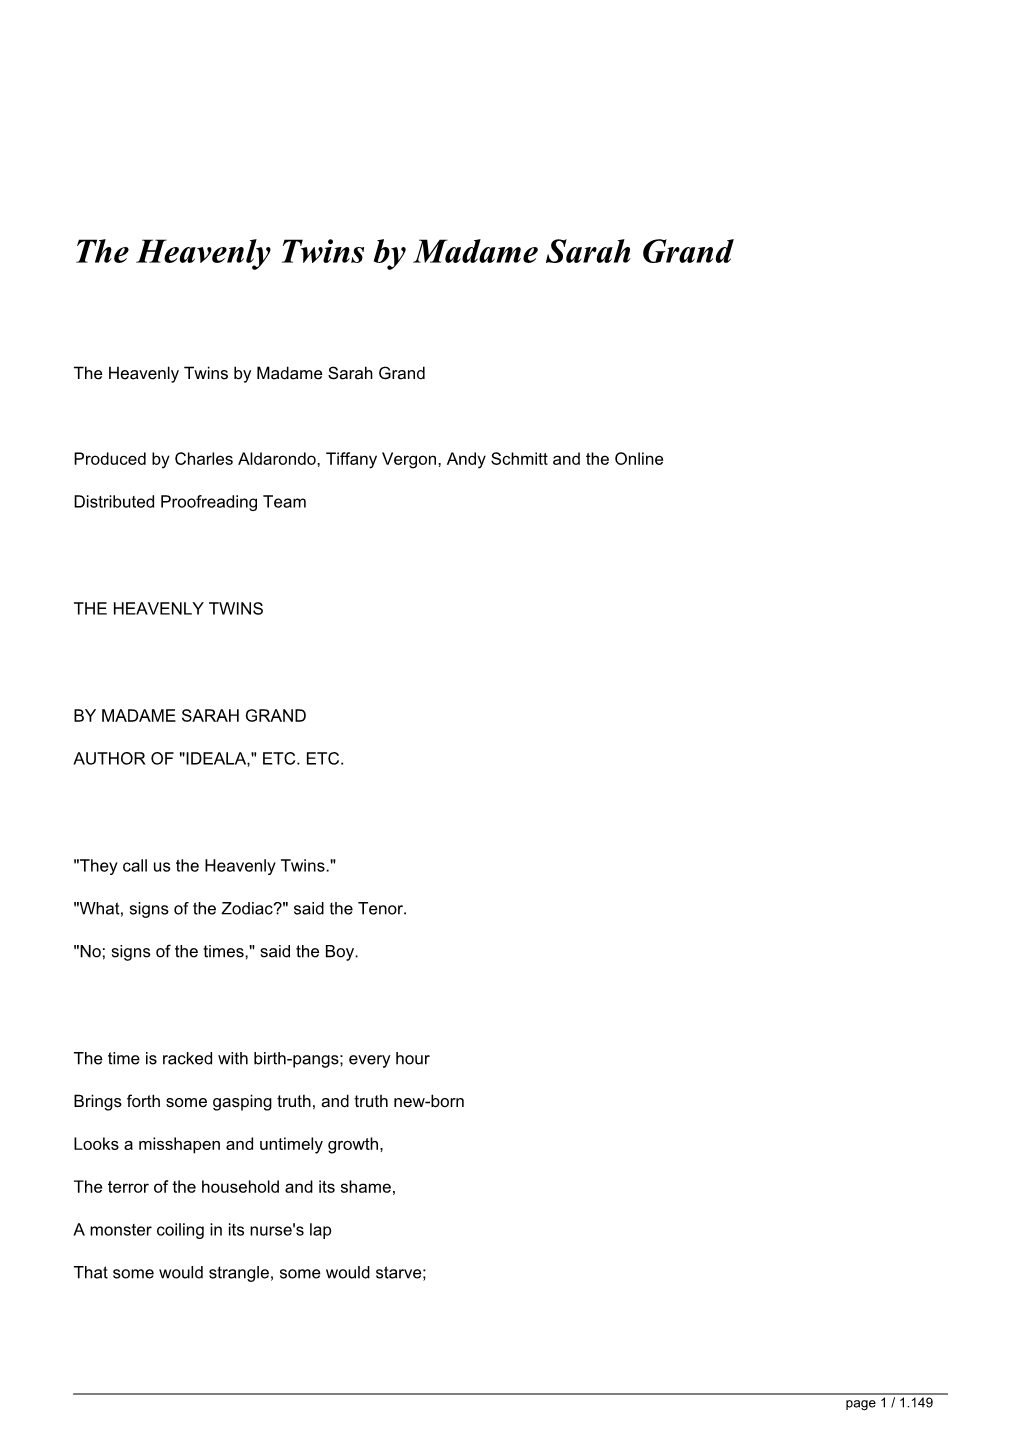 The Heavenly Twins by Madame Sarah Grand